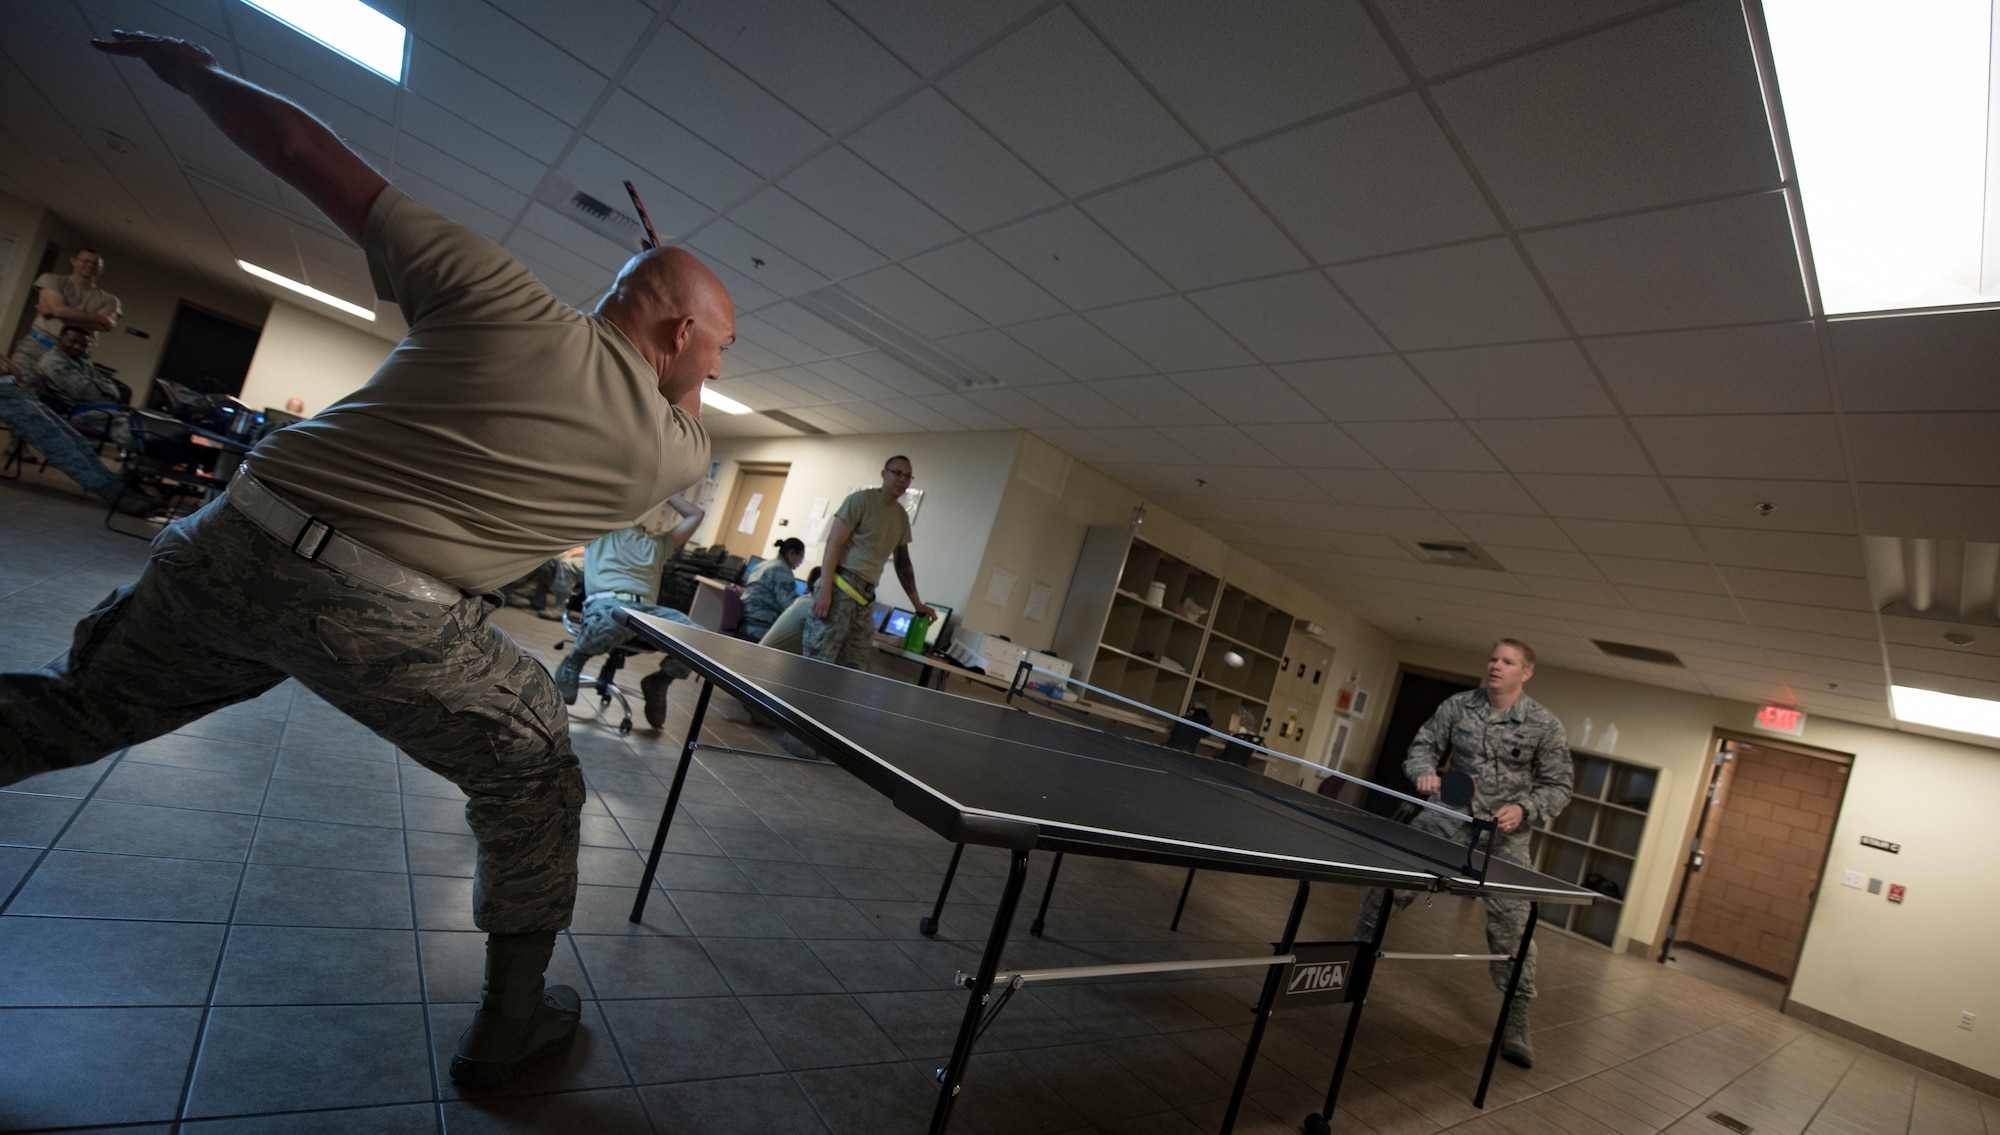 Staff Sgt. Joseph Johnson, 57th Aircraft Maintenance Squadron Lightning Aircraft Maintenance Unit avionics technician, plays table tennis with Staff Sgt. Joshua Harris, 57th AMXS Lightning AMU activity security manager, between shift changes at Nellis Air Force Base, Nevada, July 23, 2018. Airmen usually get time to unwind toward the end of their shift if their tasks are done for the day. (U.S. Air Force photo by Airman 1st Class Andrew D. Sarver)